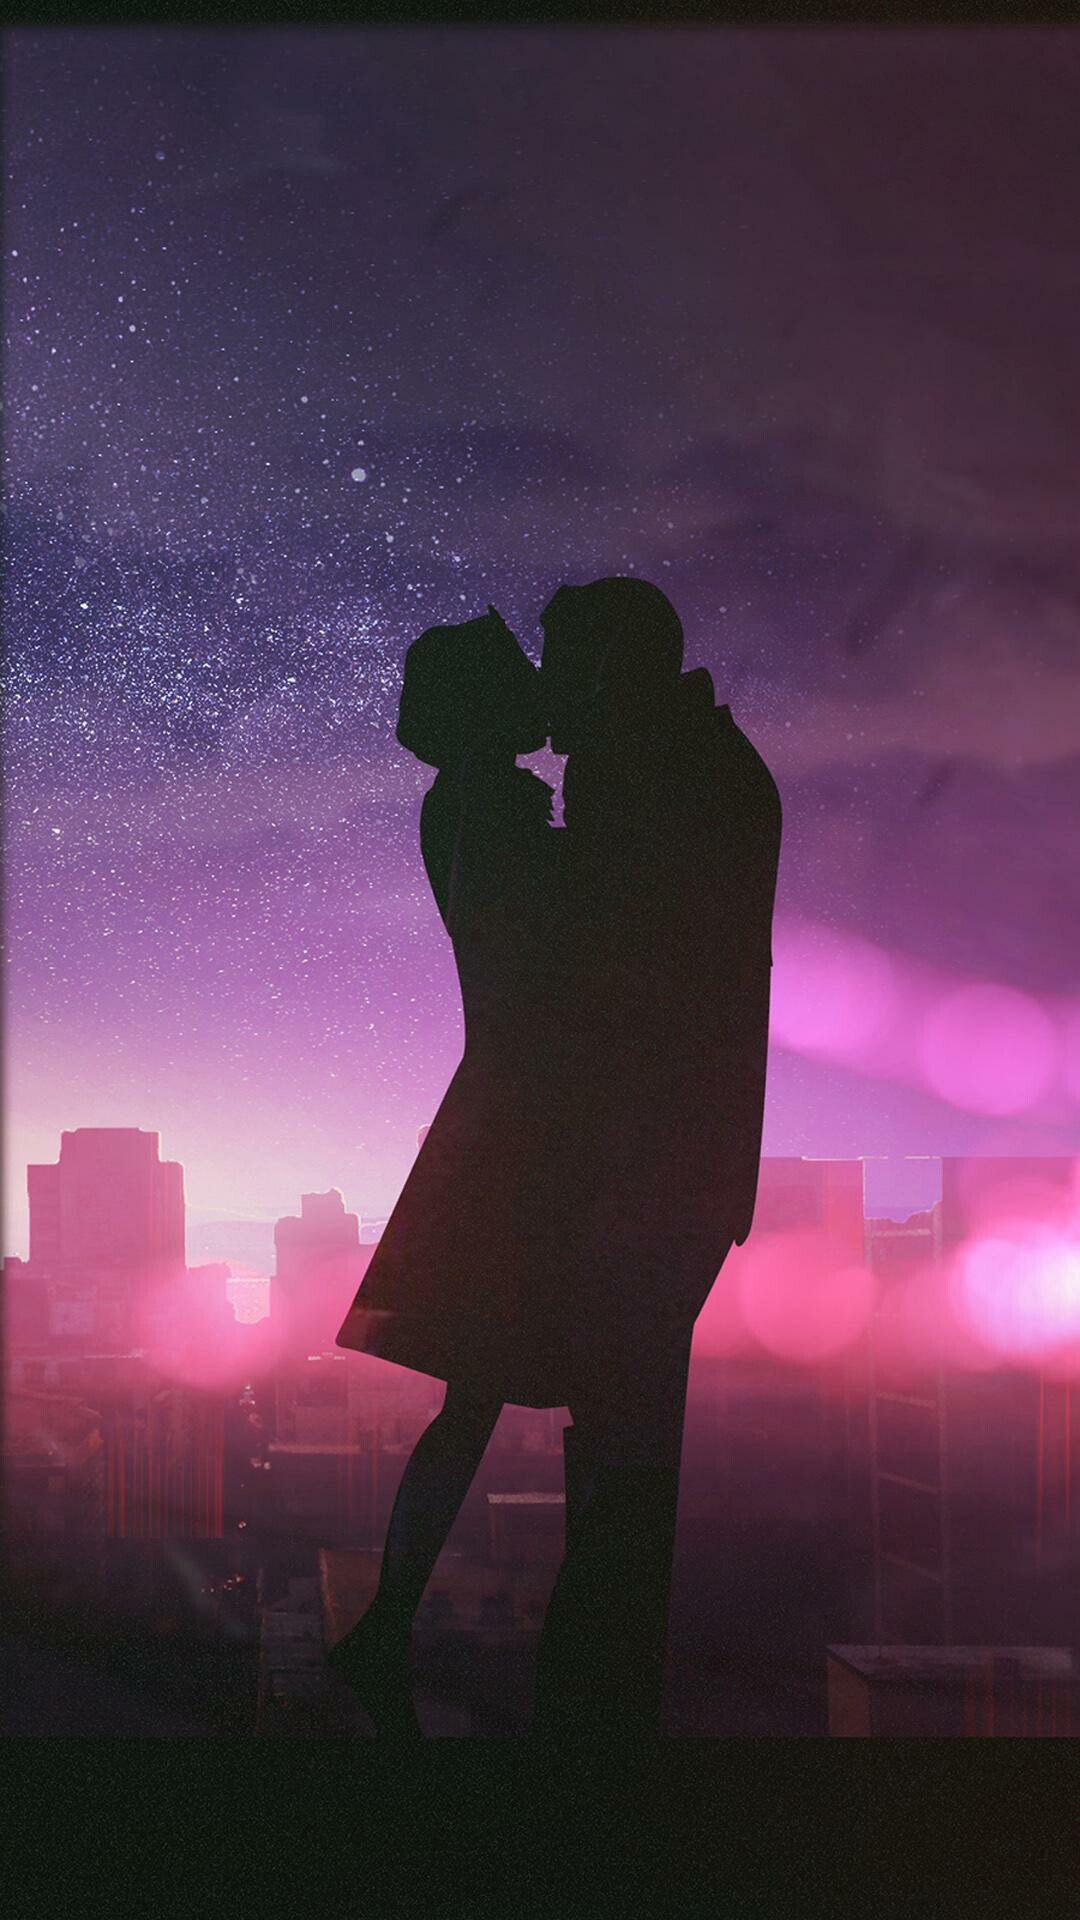 Kiss: Kissing, Amorousness, Passion. 1080x1920 Full HD Background.